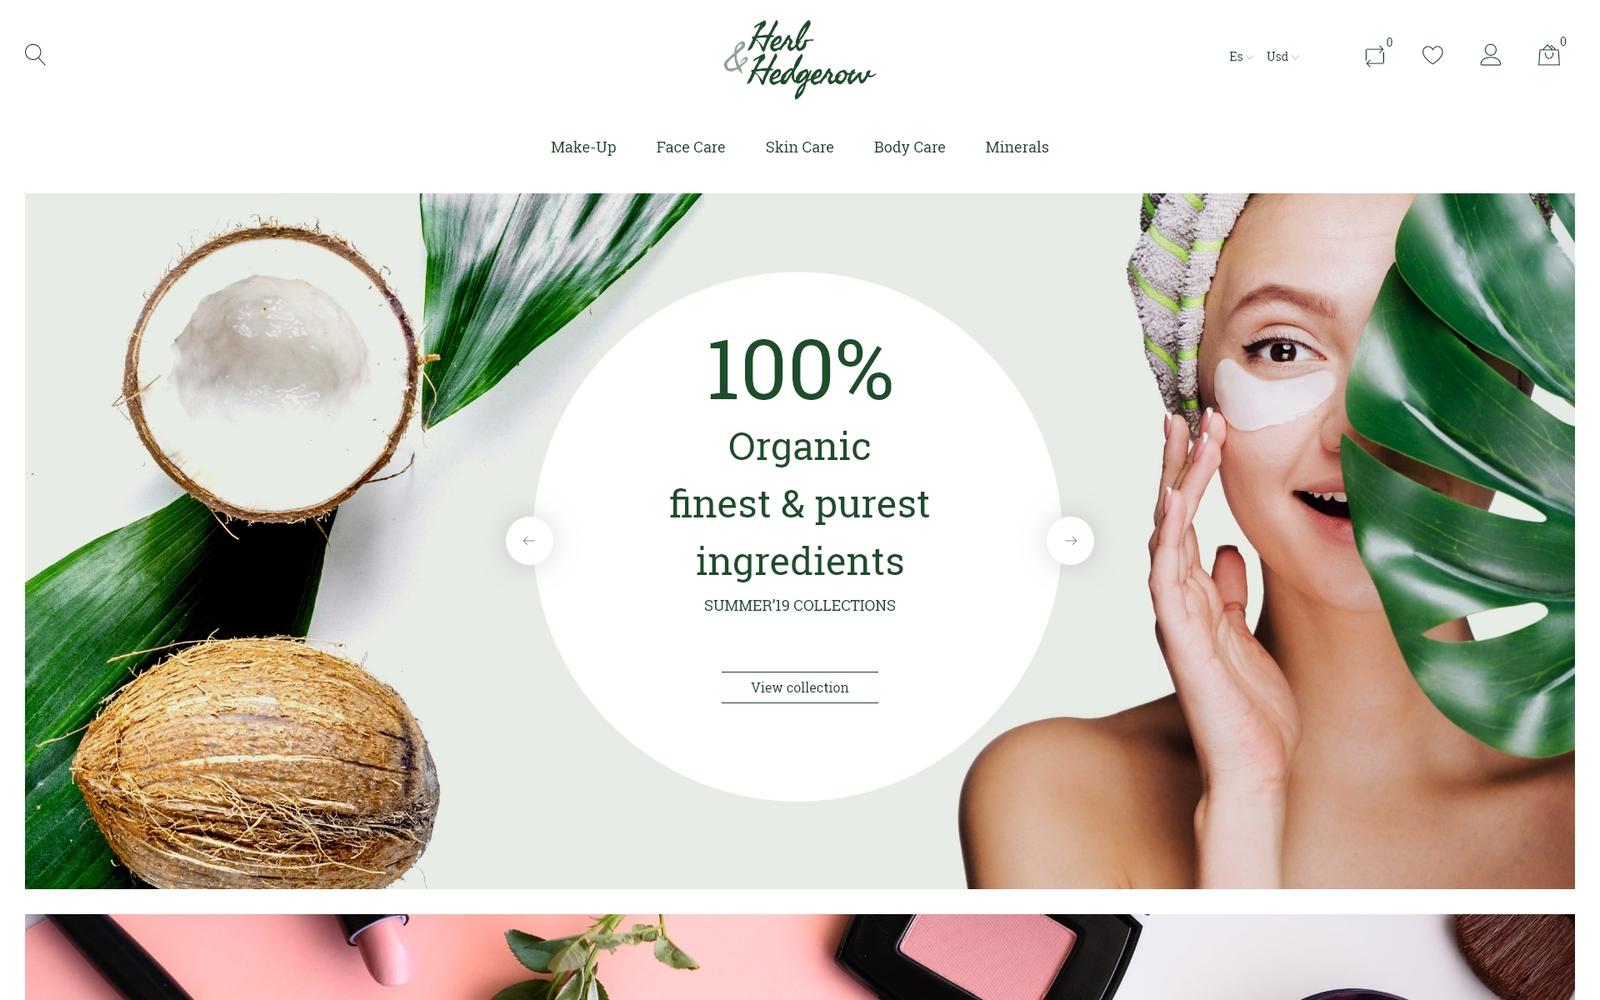 Herb and Hedgerow - Organic Cosmetics Store Bootstrap Clean Ecommerce Тема PrestaShop